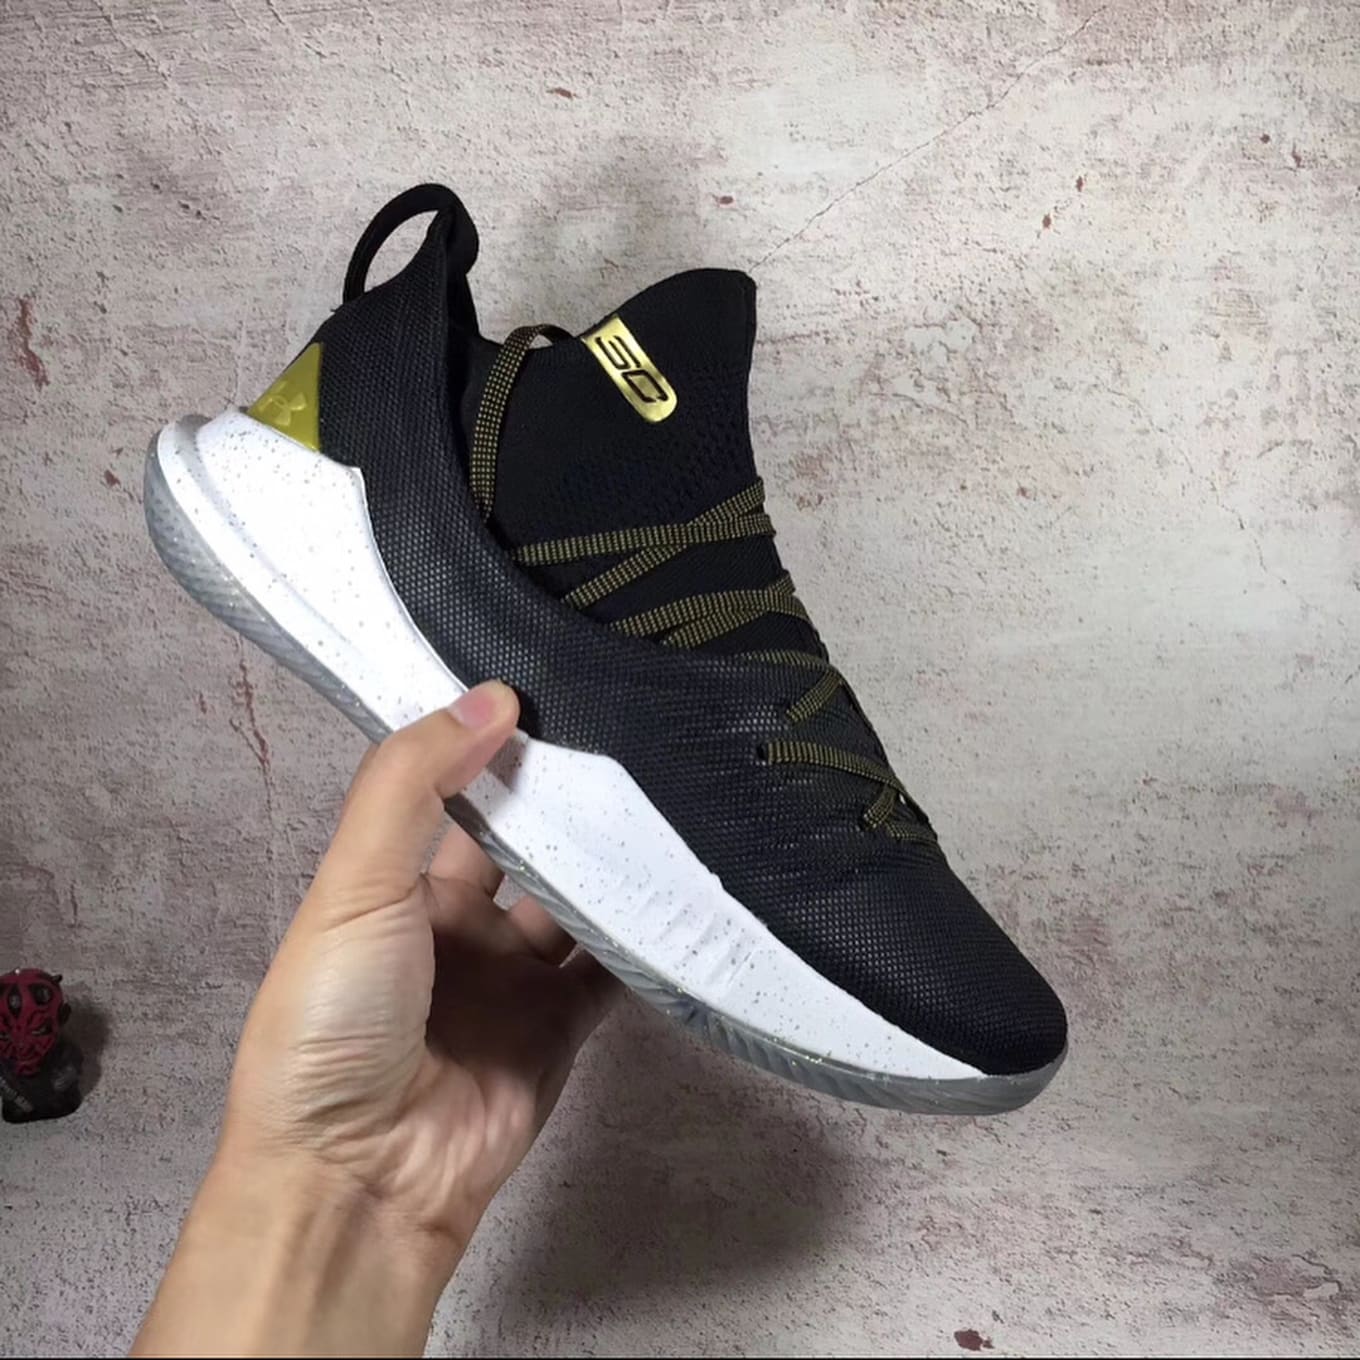 Under Armour Curry 5 Black/Gold 3020657 